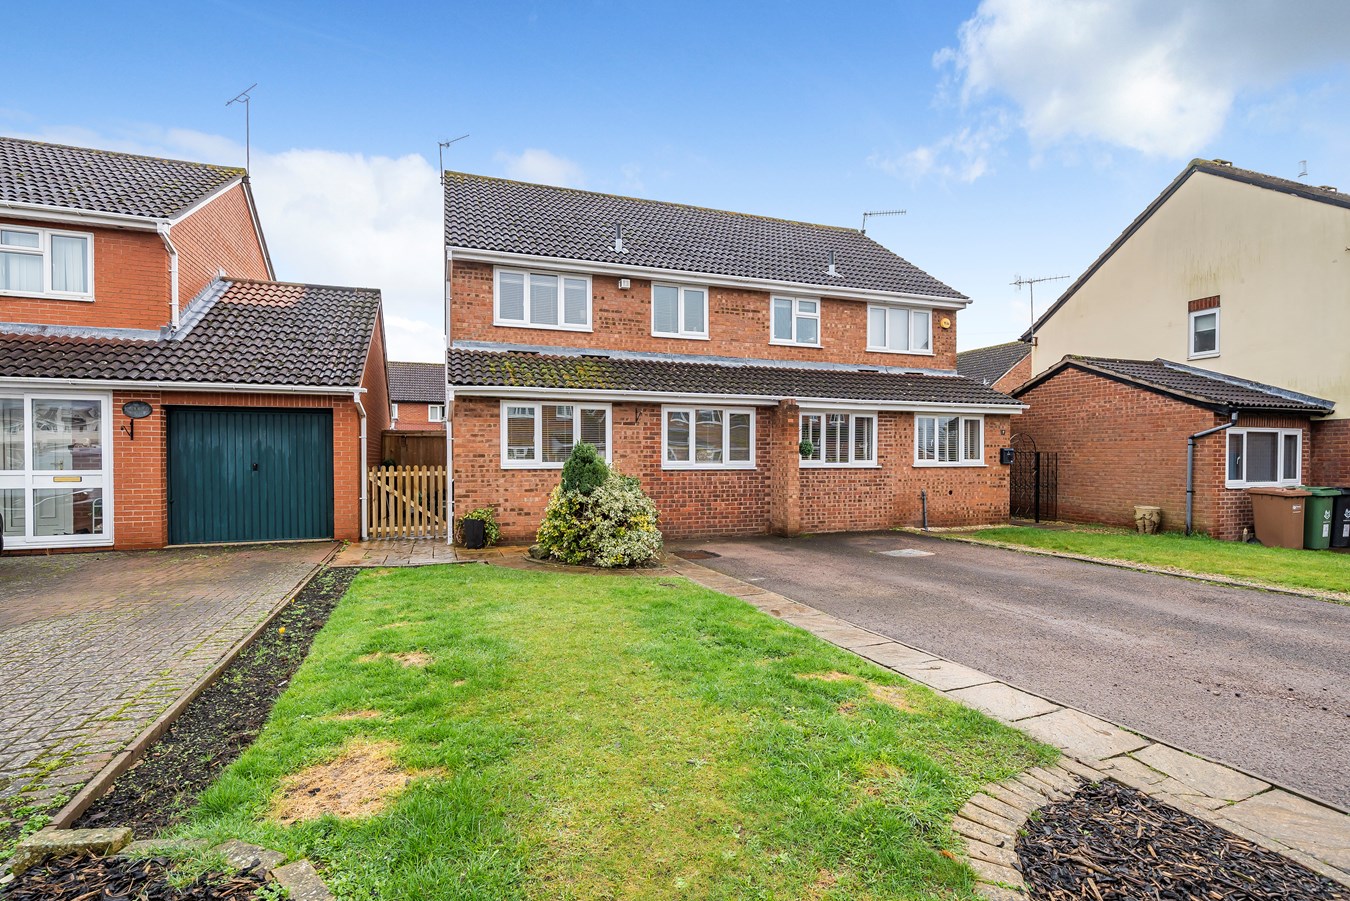 Batsford Road, St Peters, Worcester, WR5